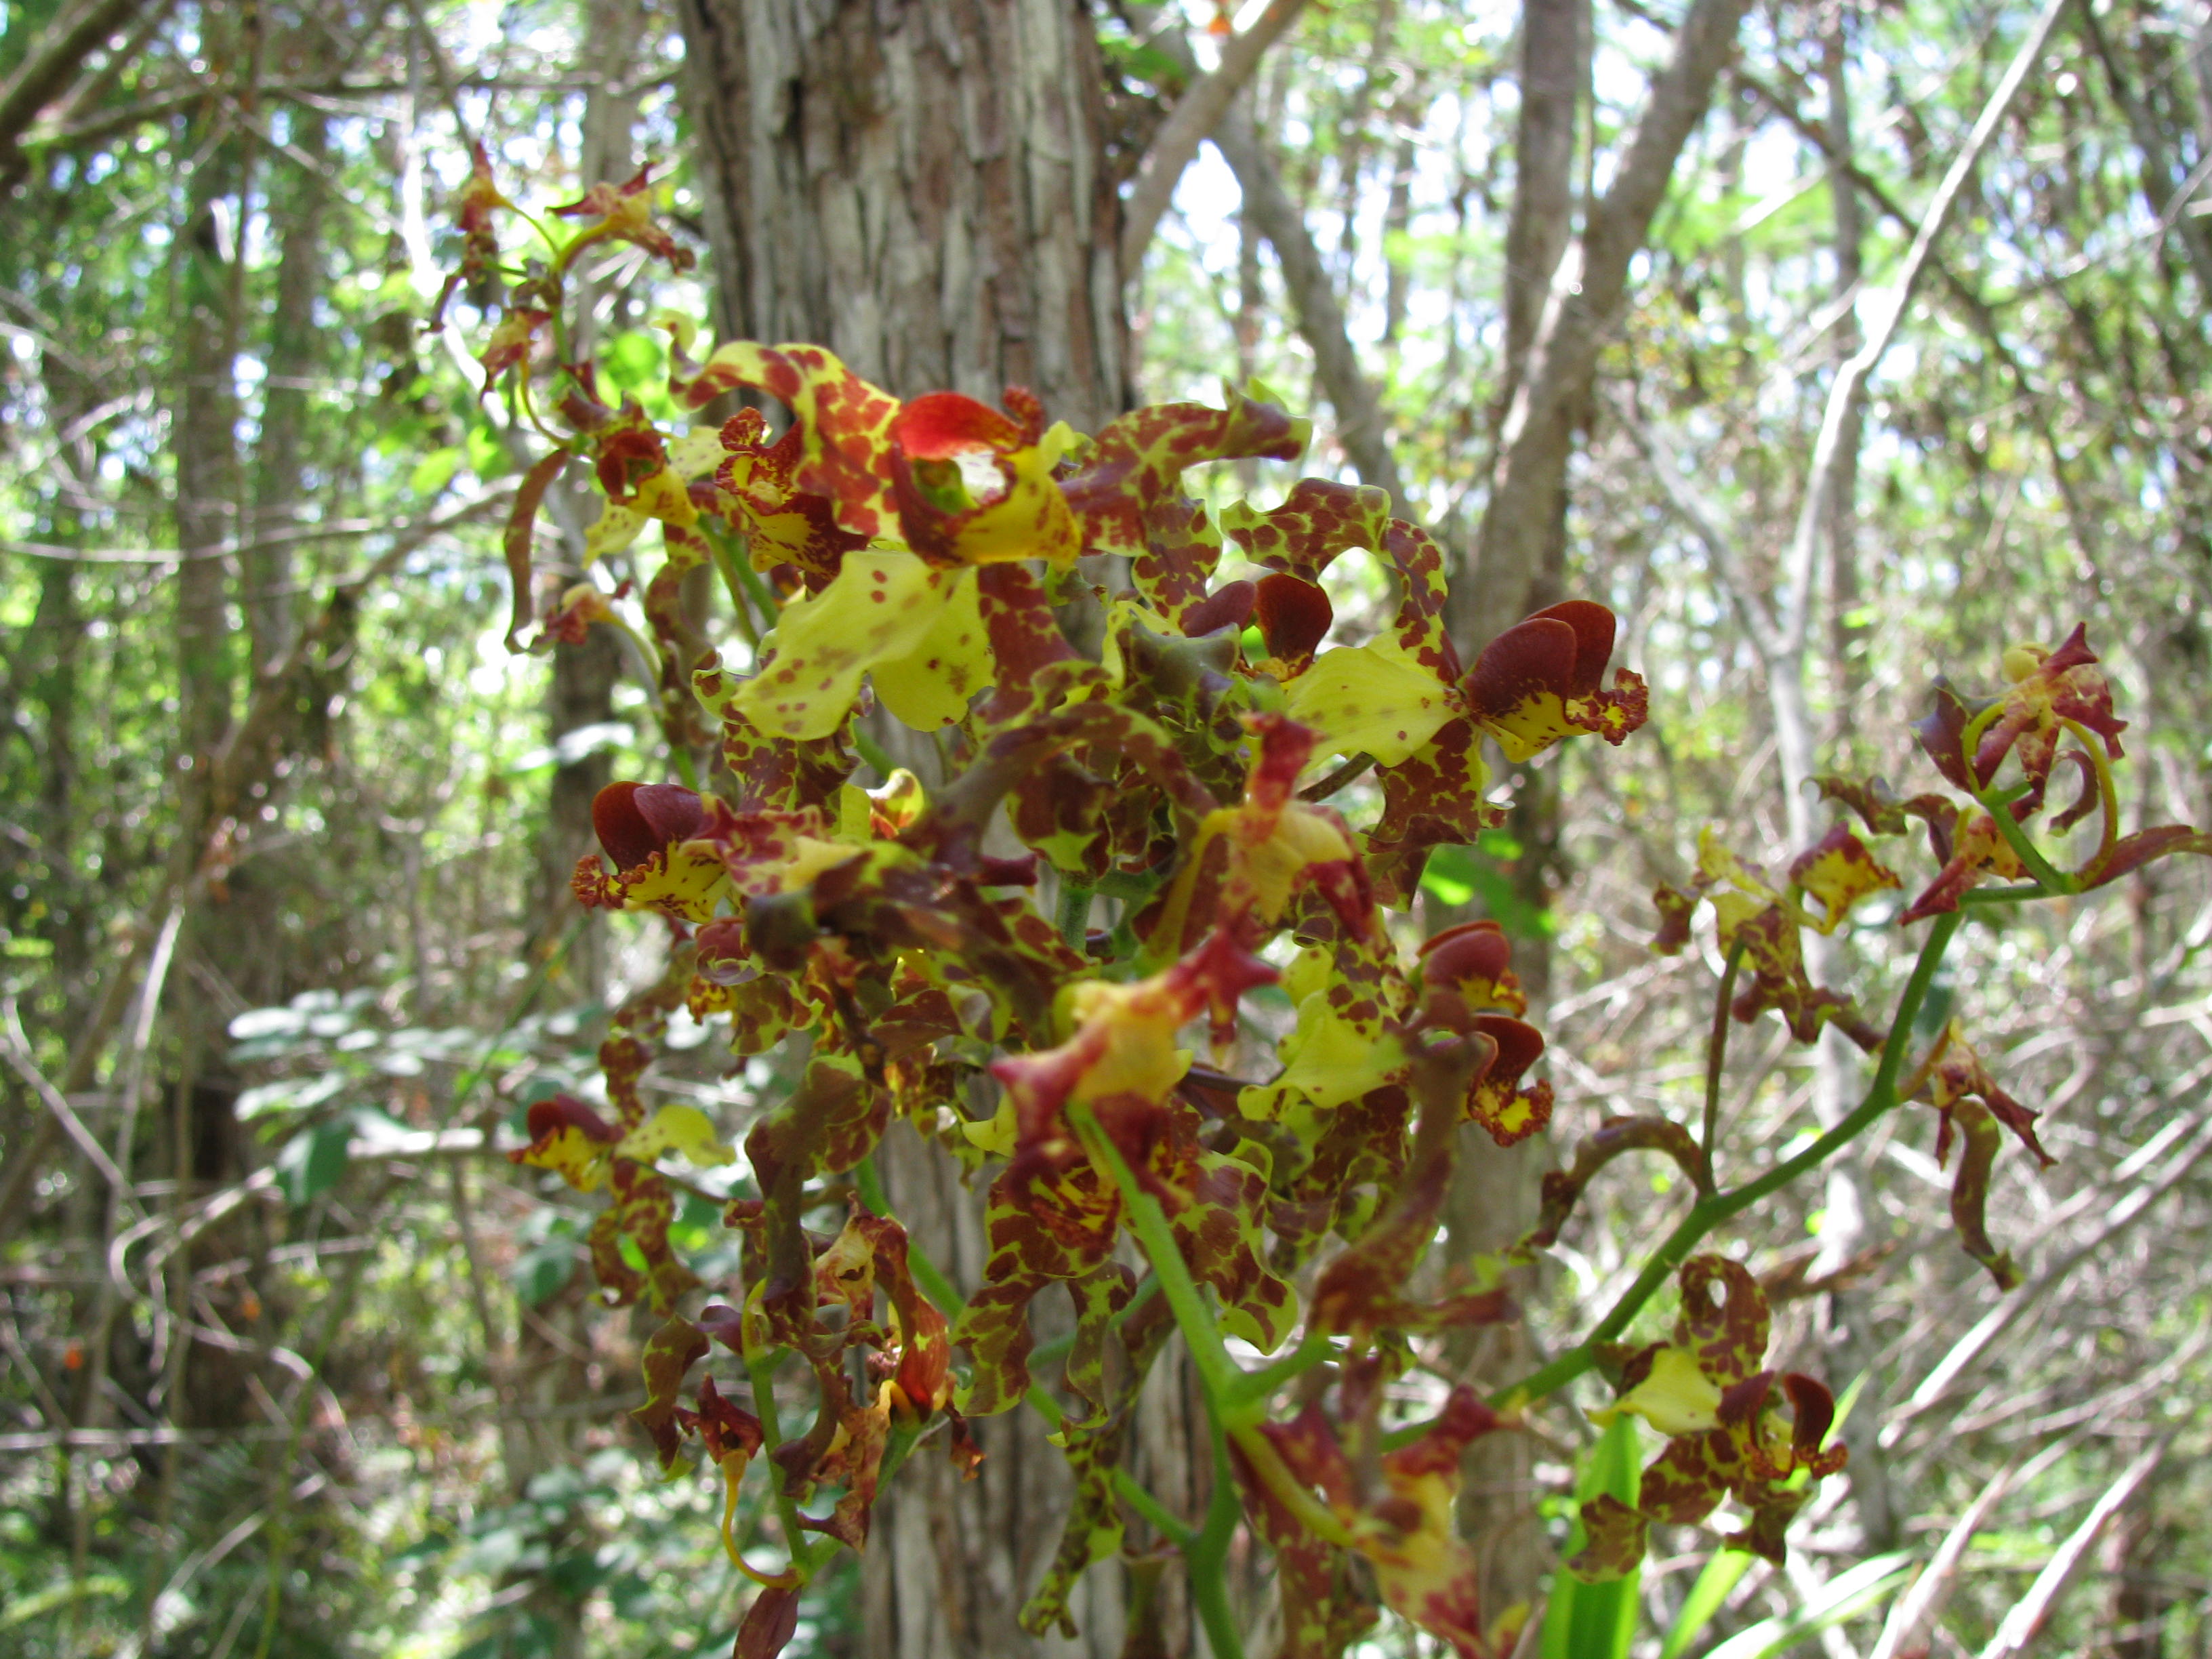 Cowhorn orchid growing at Collier-Seminole State Park.